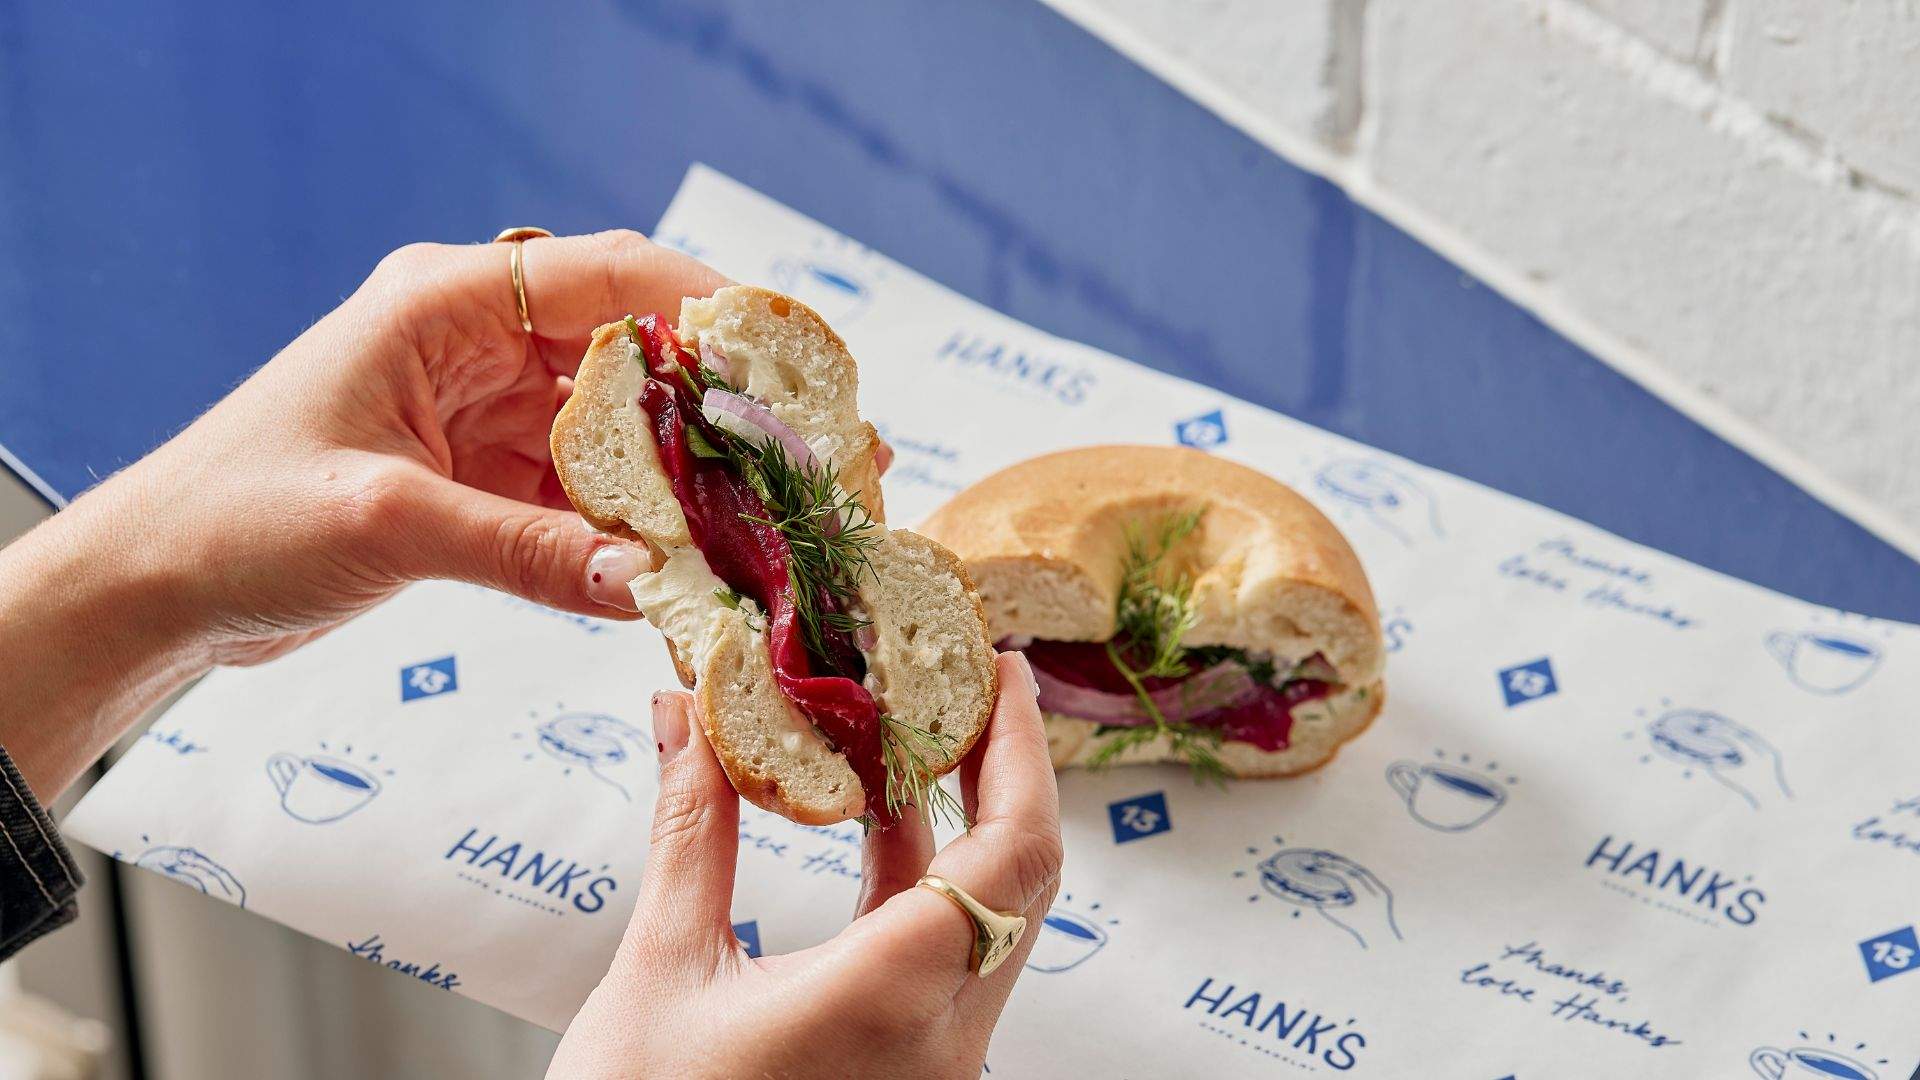 Hank's Has Landed in Armadale With New York-Style Bagels and Loaded Thickshakes